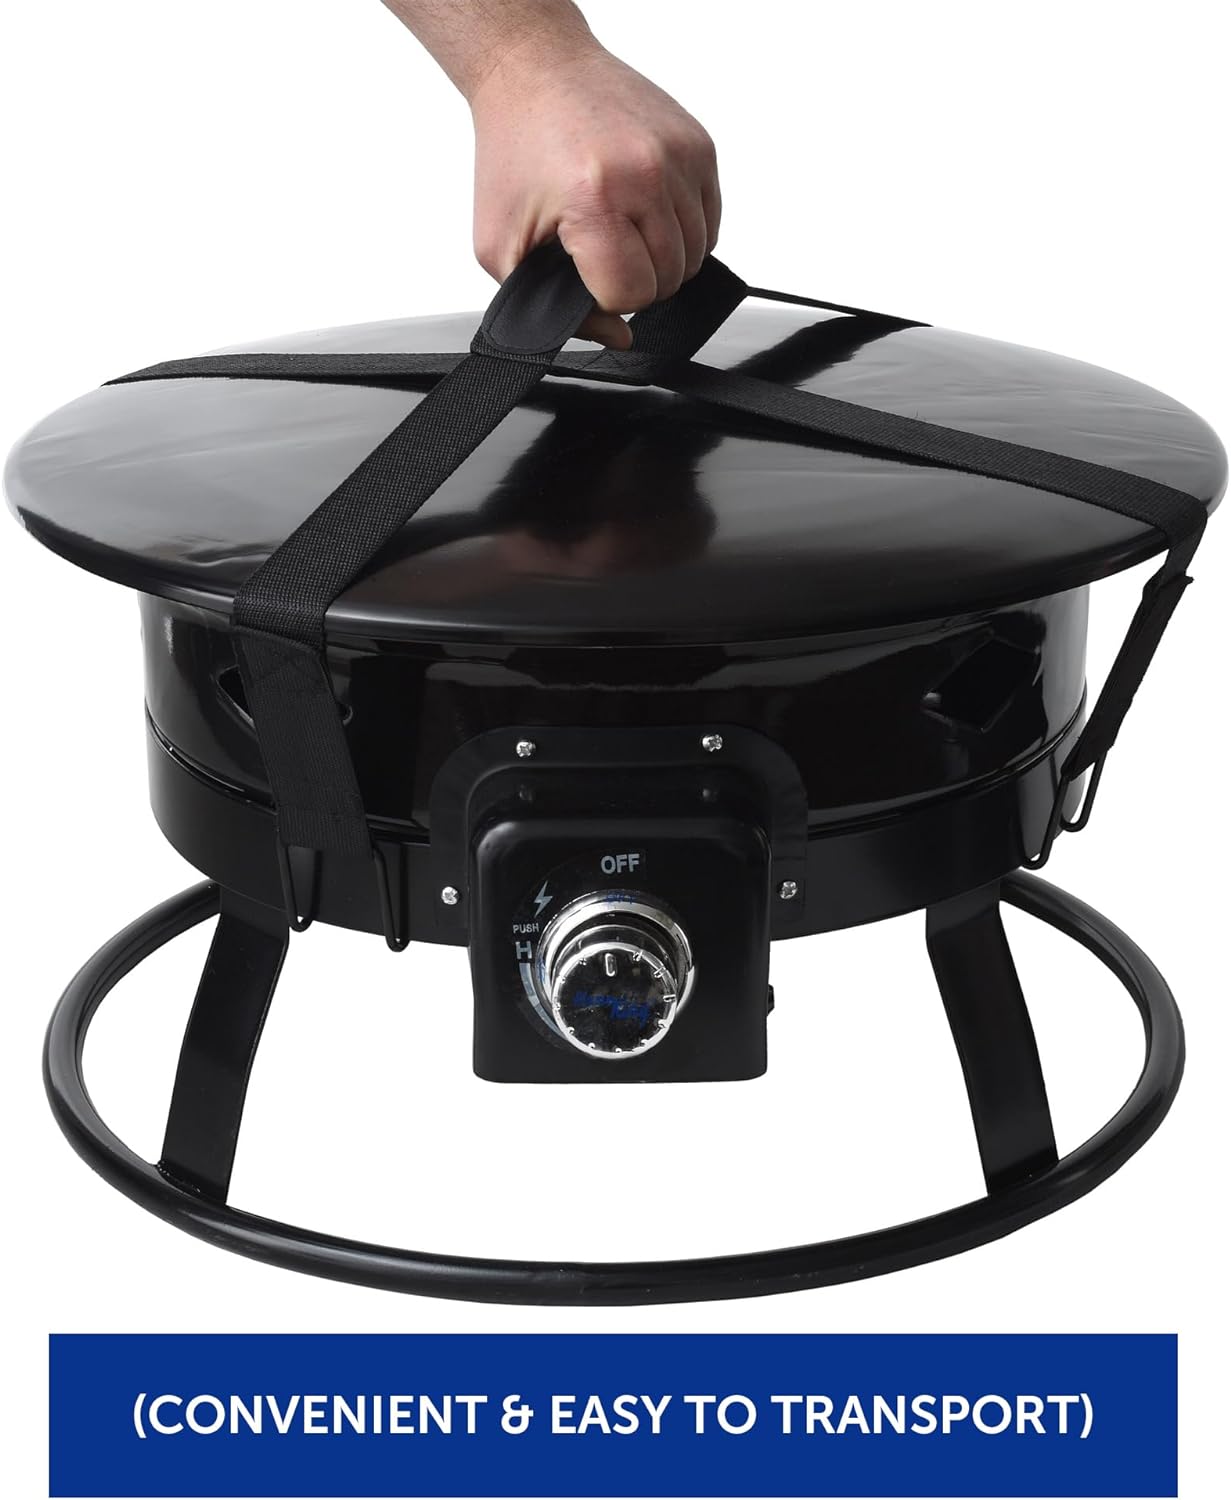 Flame King Fire Pit Review